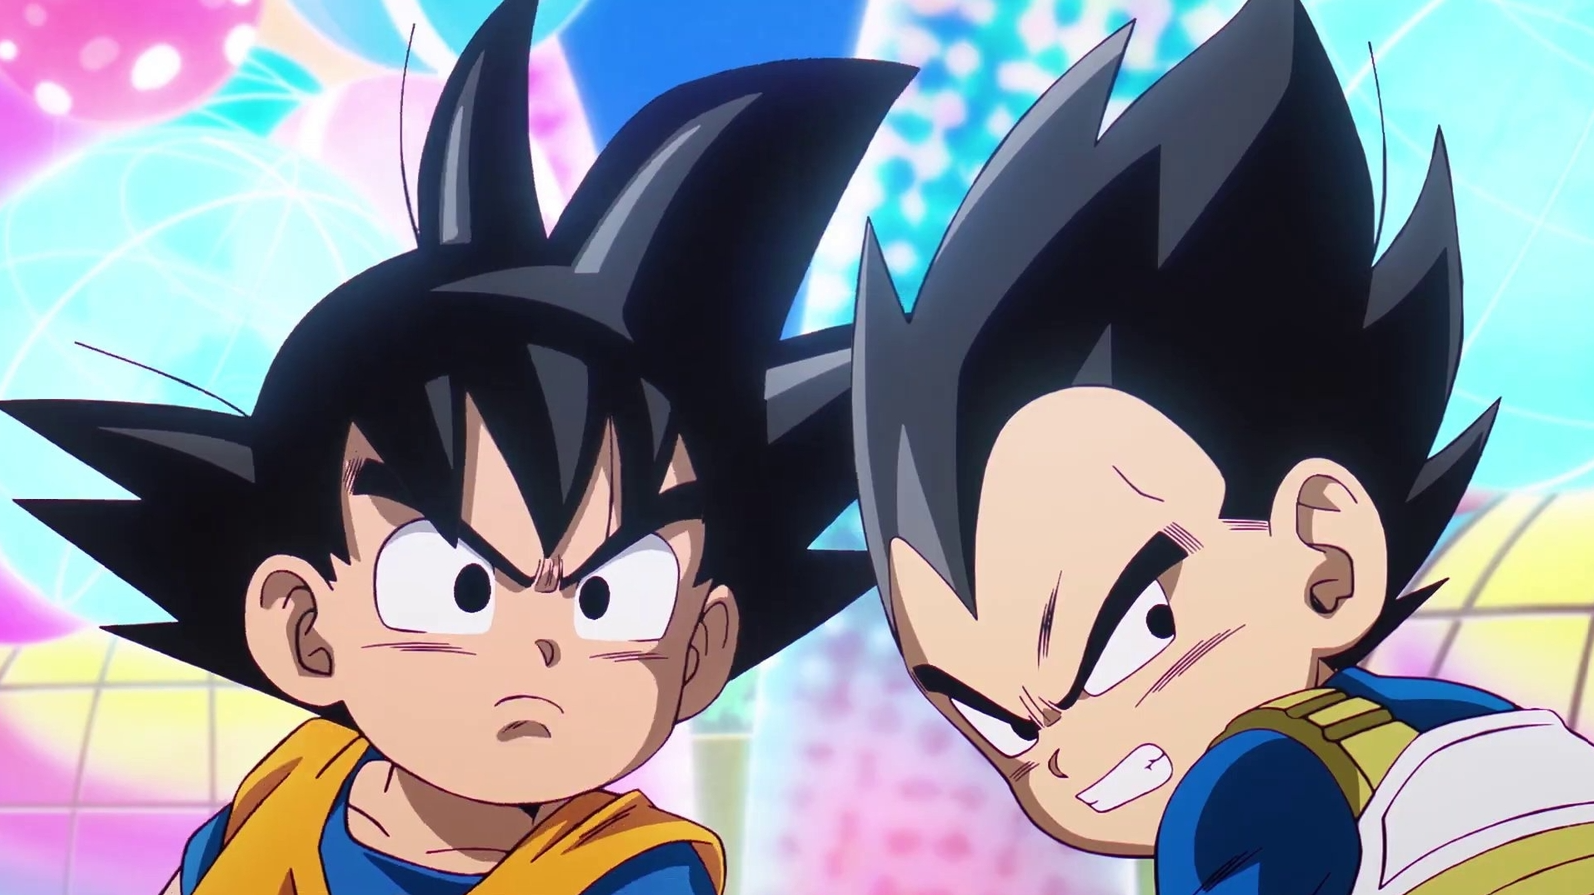 Toei has given up on Dragon Ball Super, and the latest cover confirms it